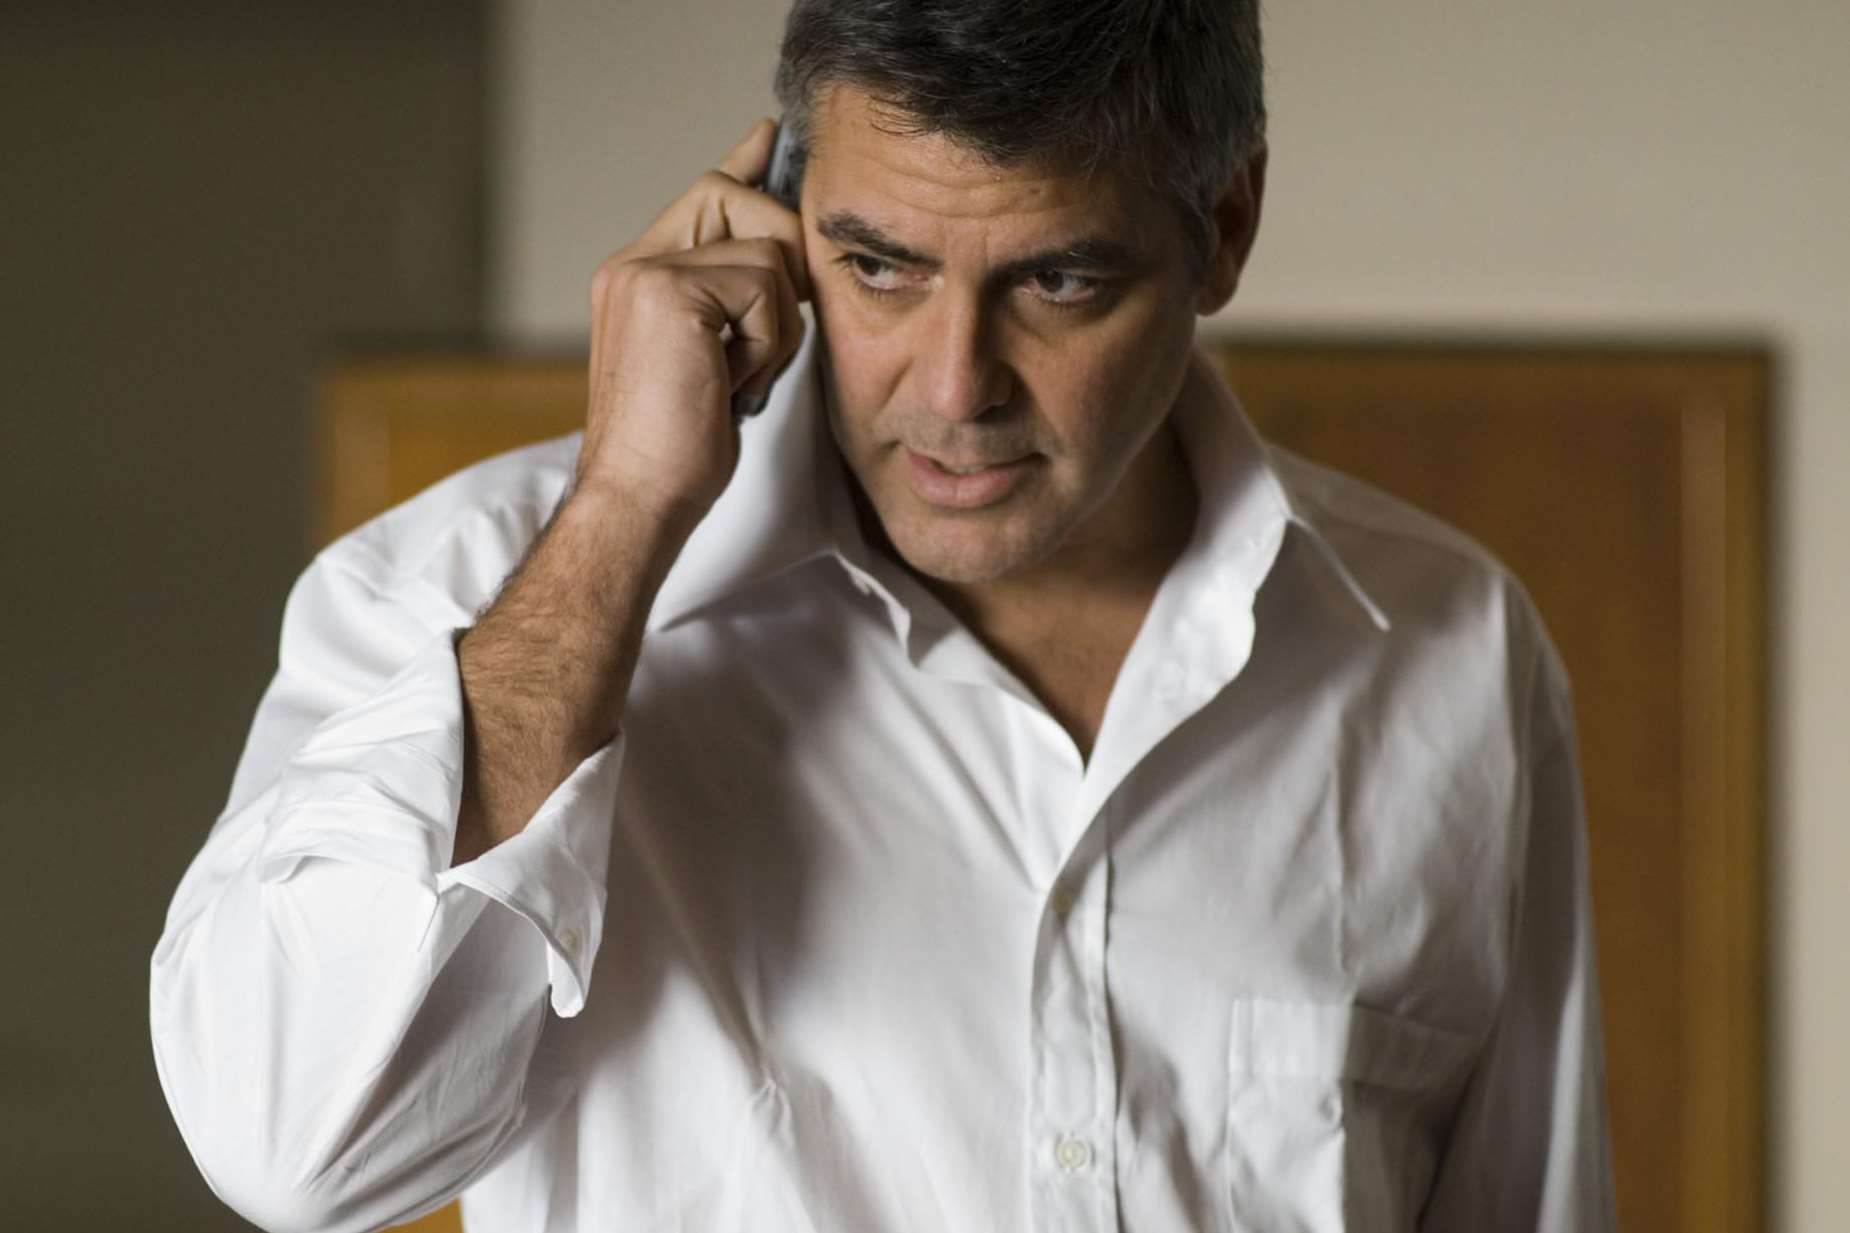 A-list actor George Clooney could be moving to Kent